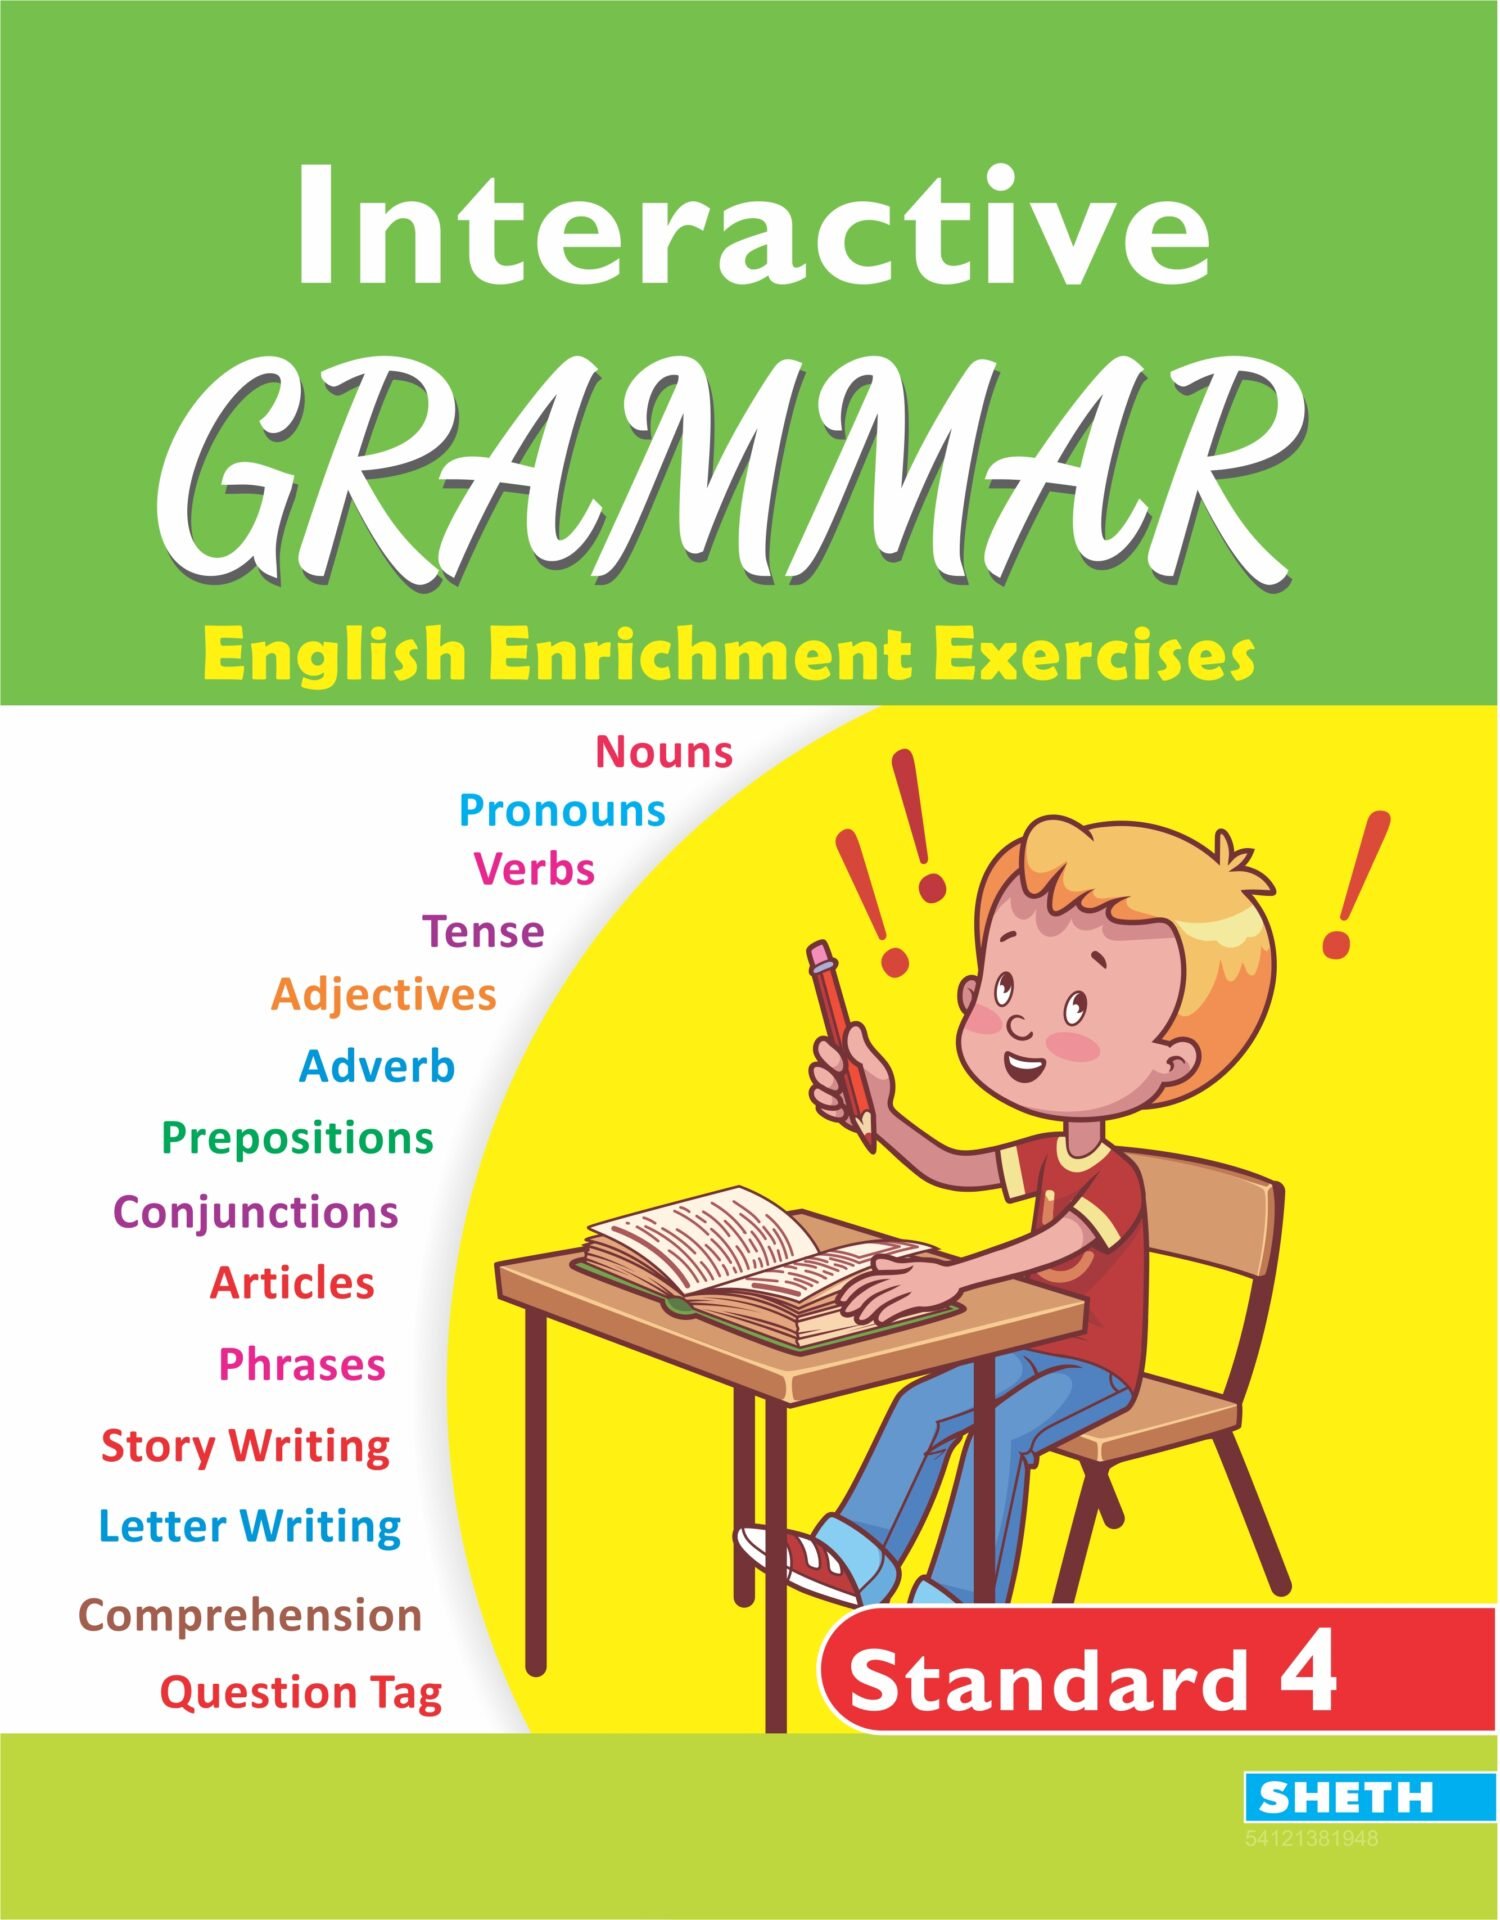 Grammar　Publishing　Page　Interactive　of　Official　SHETH　Standard　House　Shethbooks　Buy